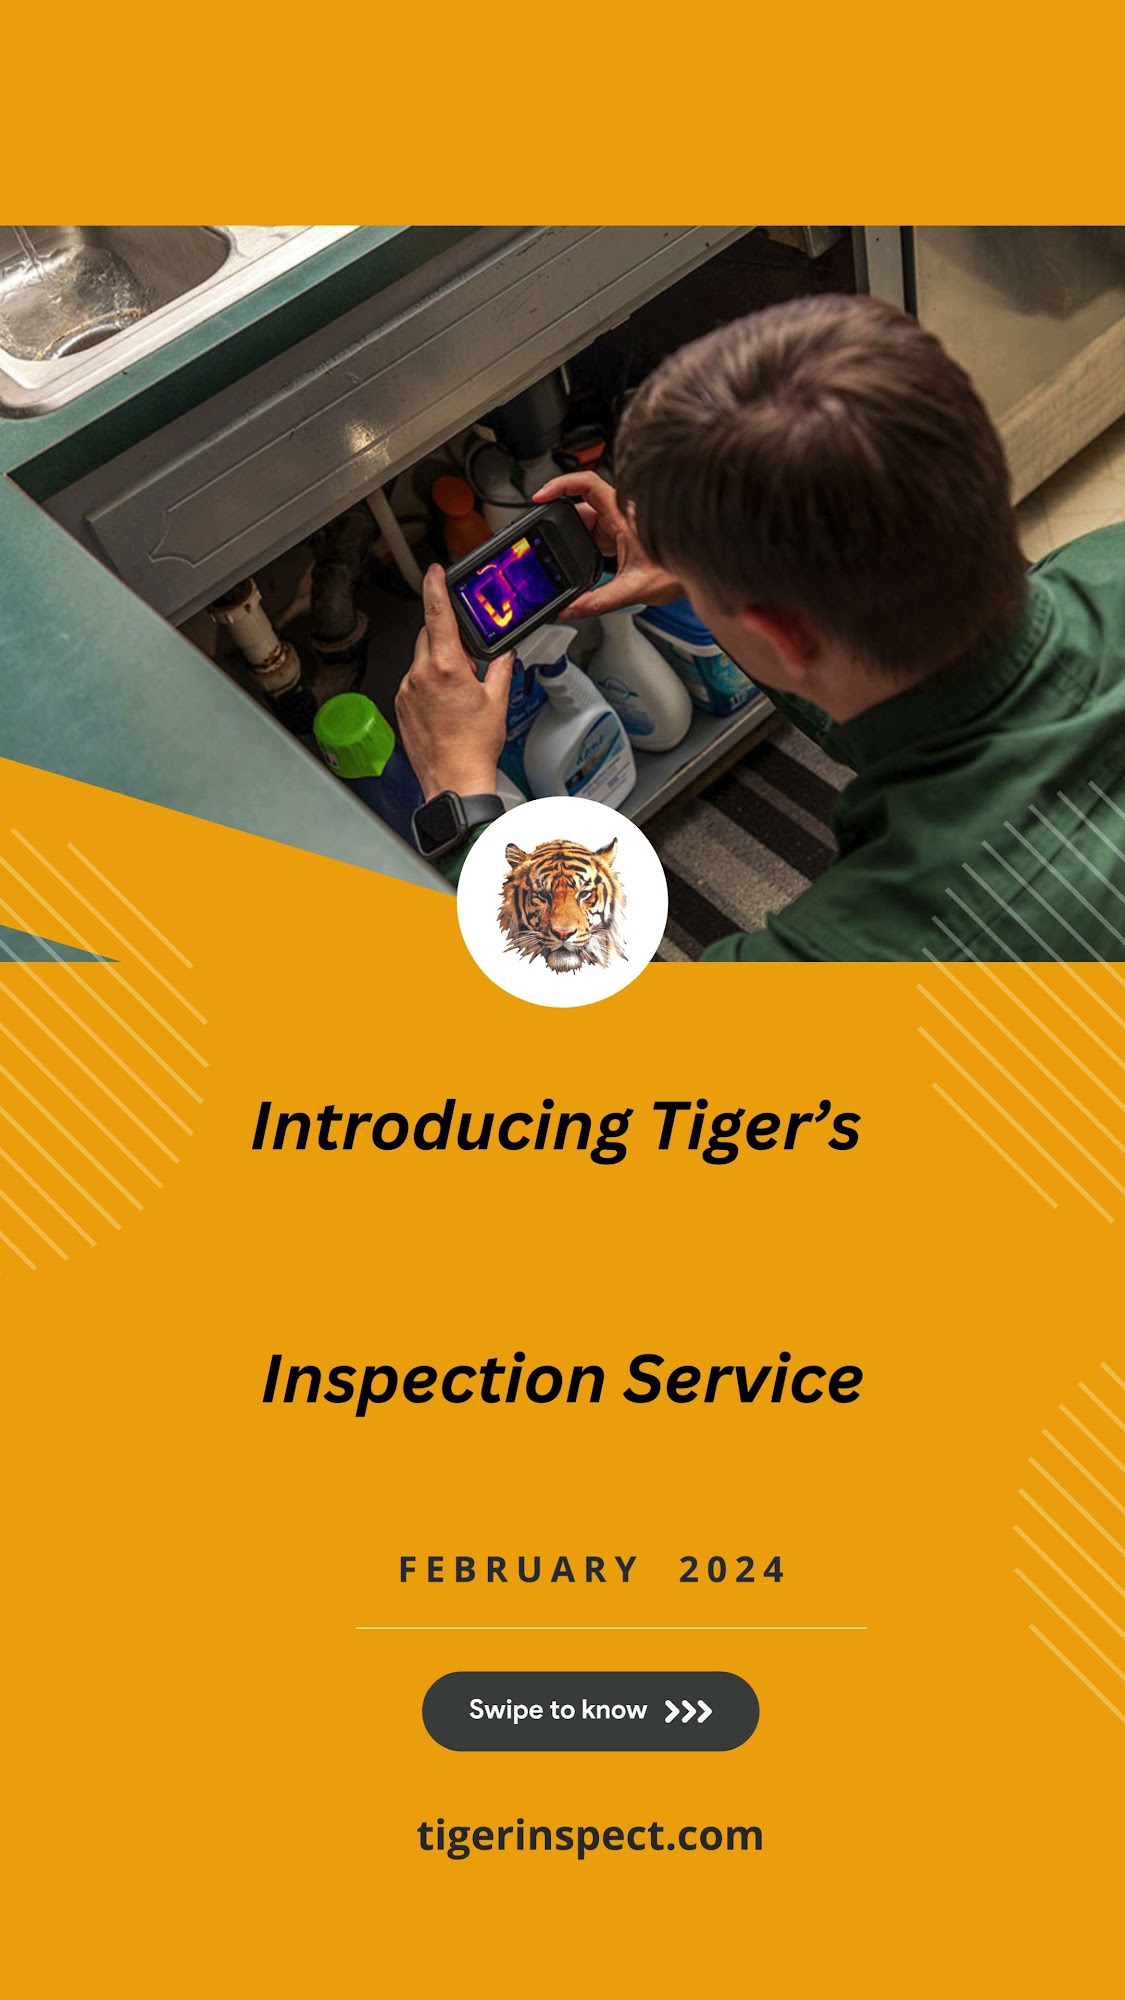 Tiger Home & Building Inspections 190 Westbrook Rd, Essex Connecticut 06426